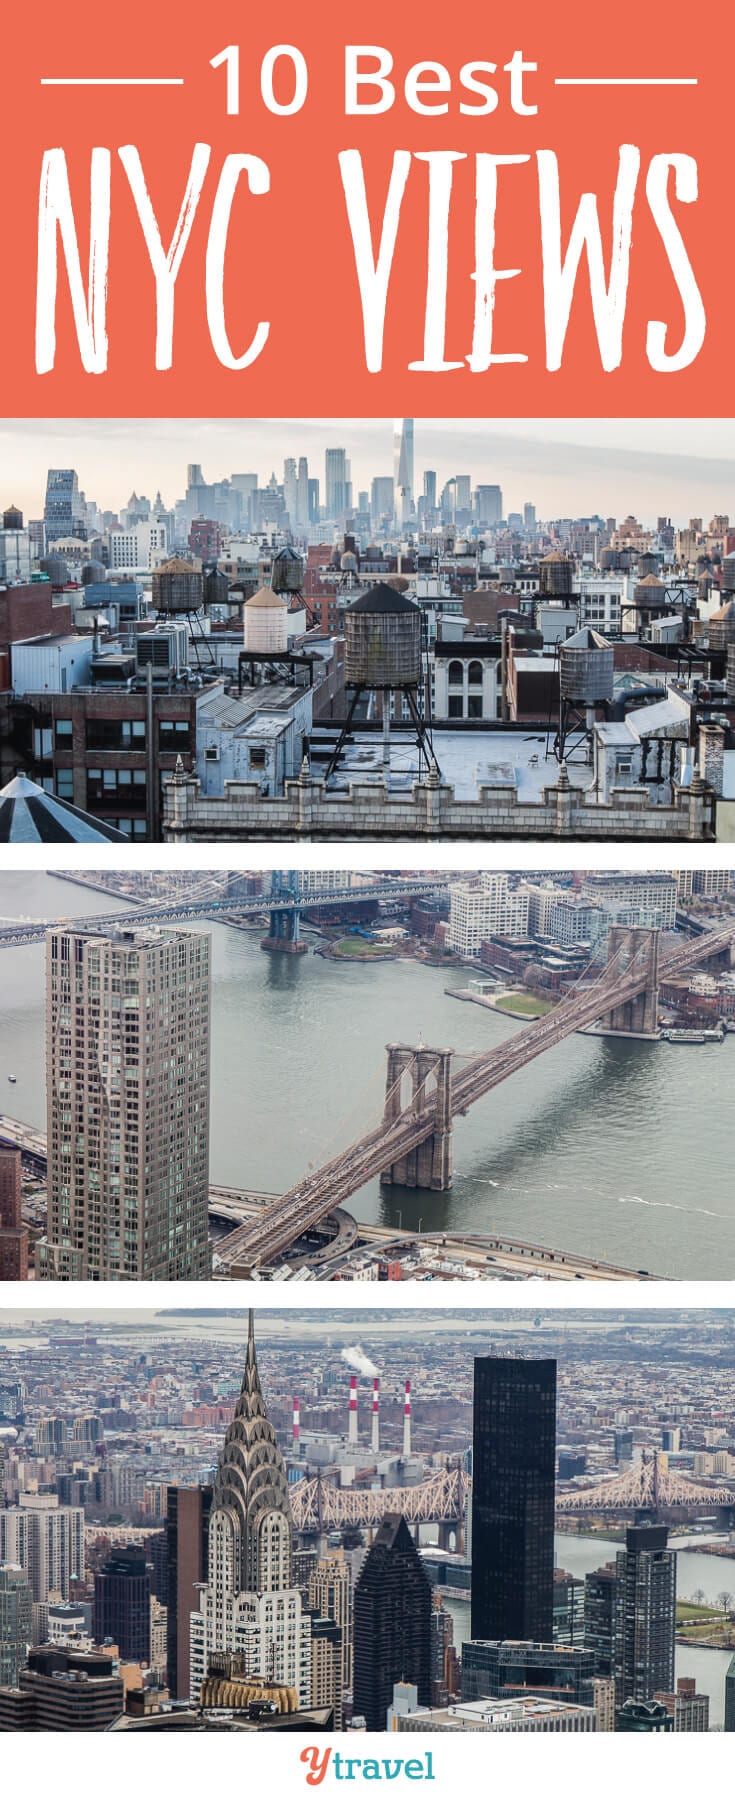 New York City has one of the most iconic skylines, check out these 10 best NYC views.